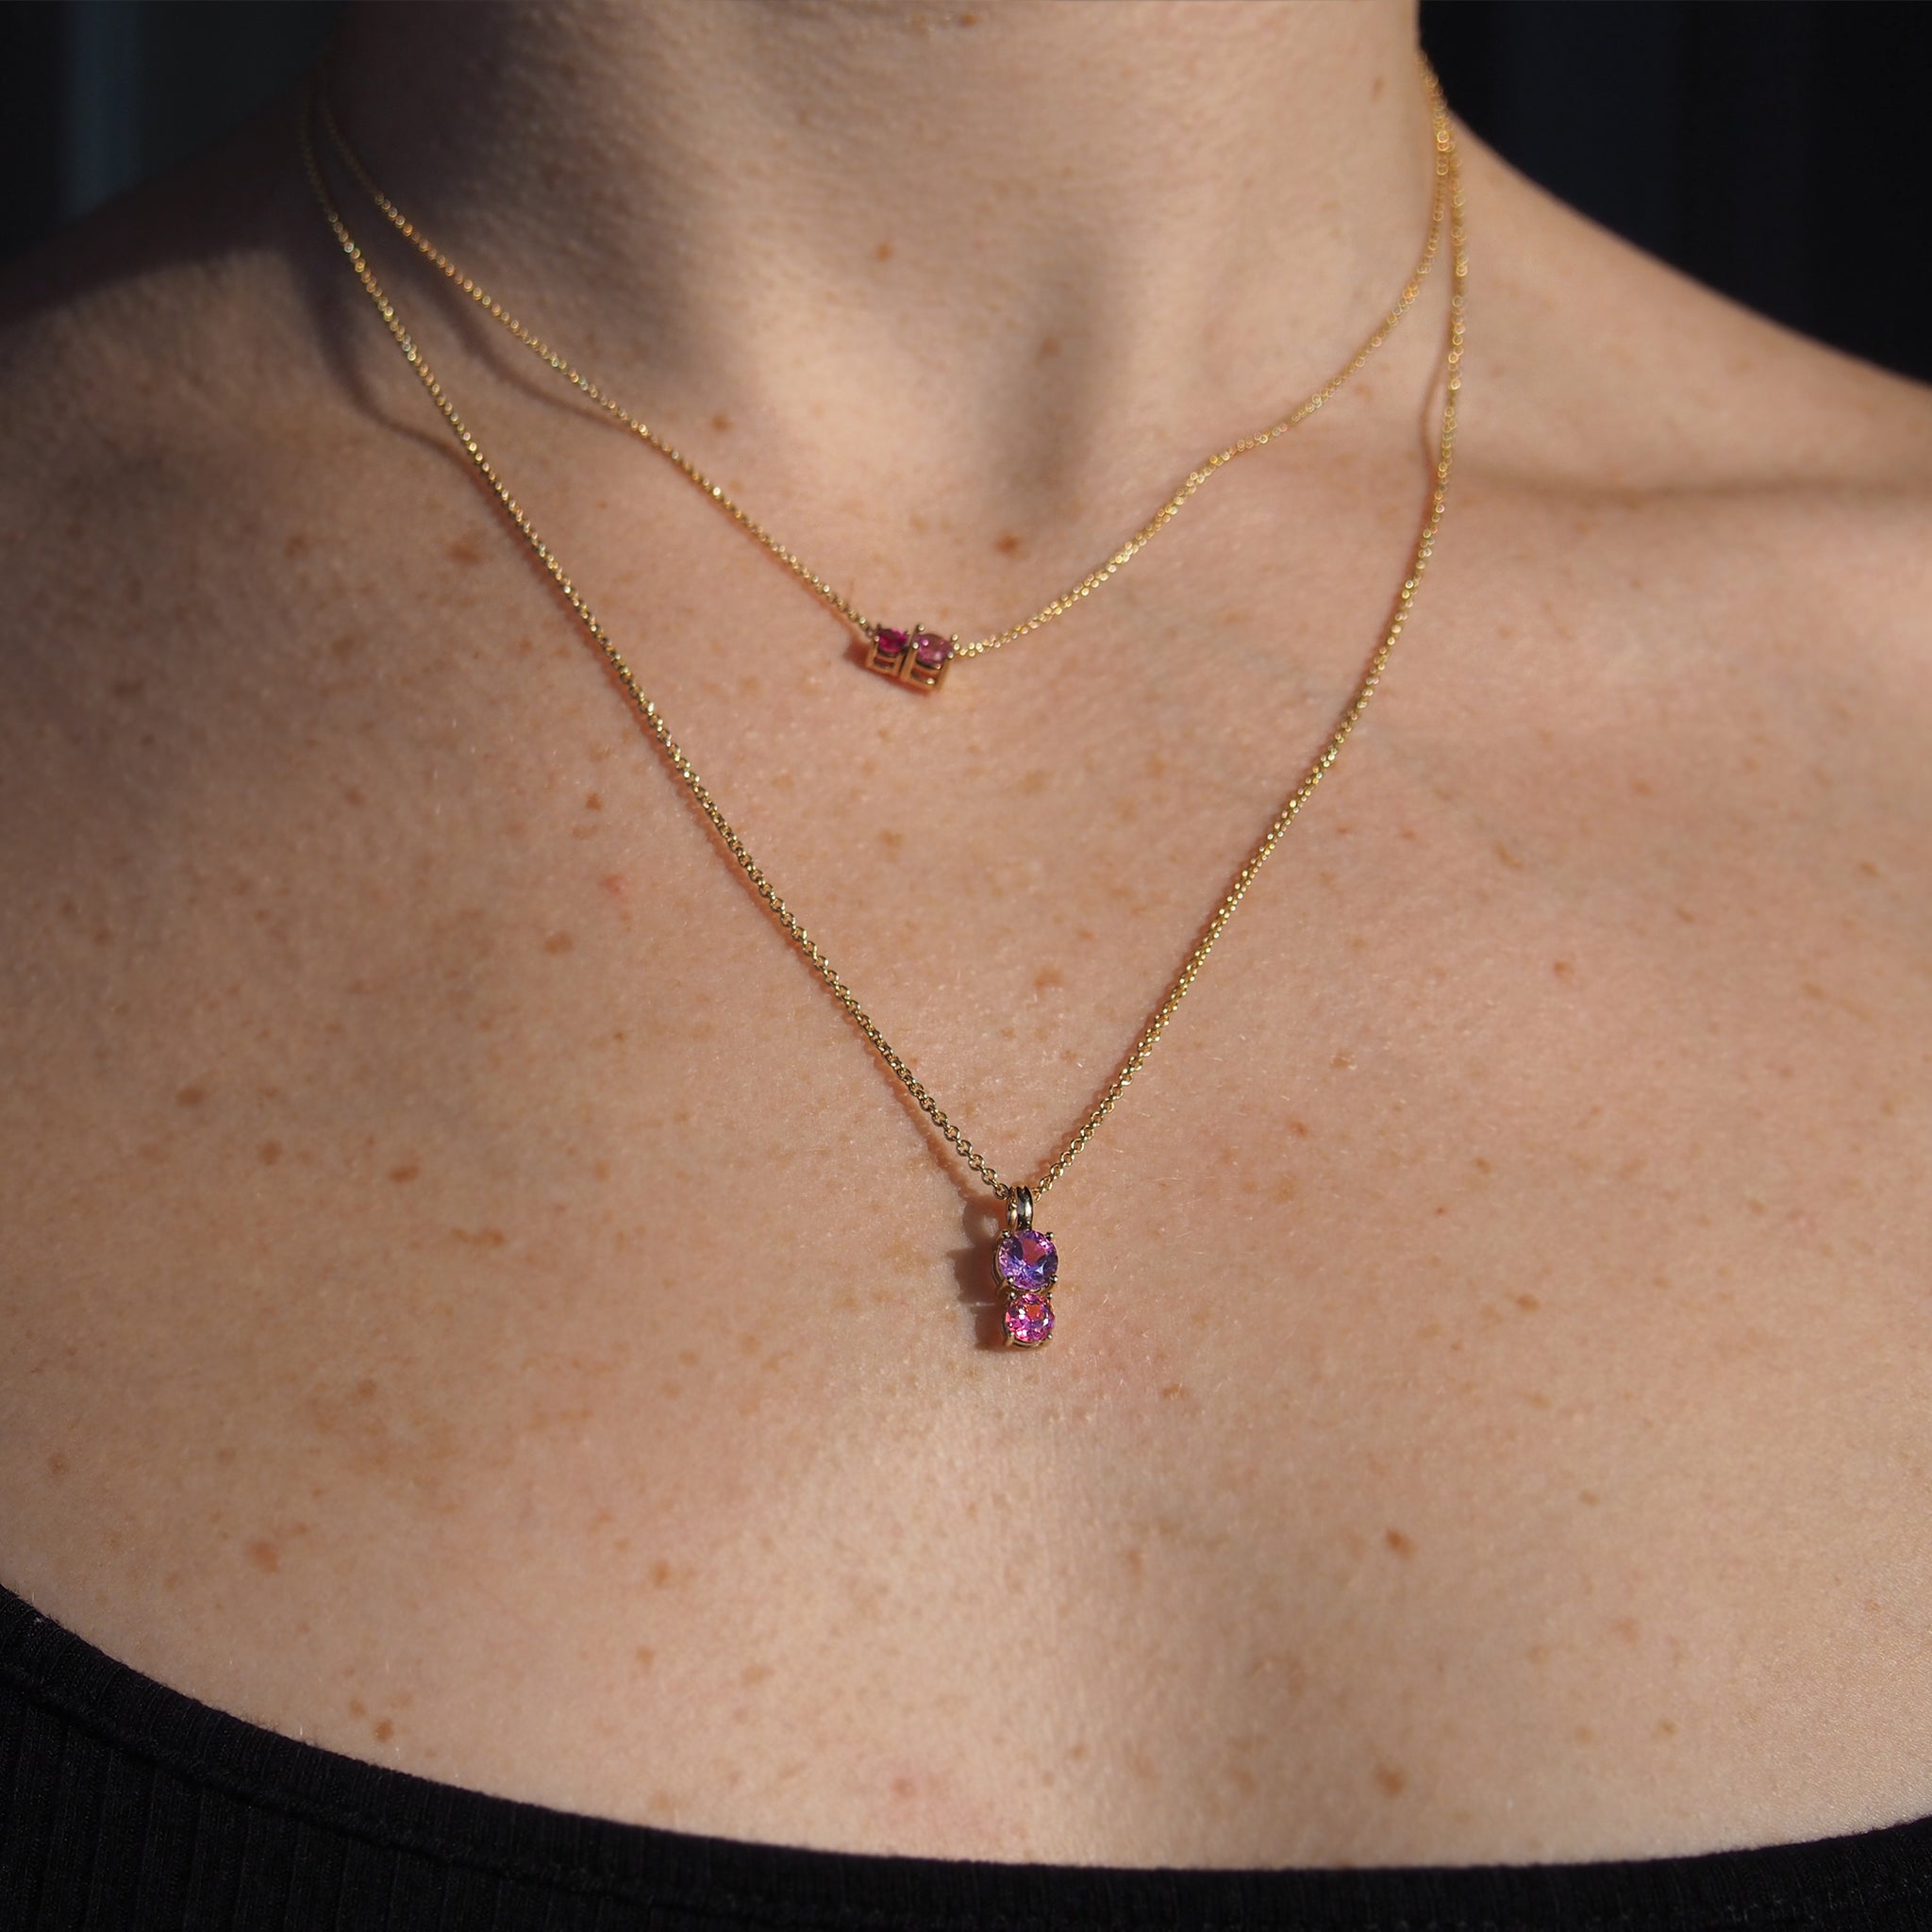 A woman wearing Lico Jewelry's Doll House pendants paired with other beautiful necklaces, based out of Montreal.